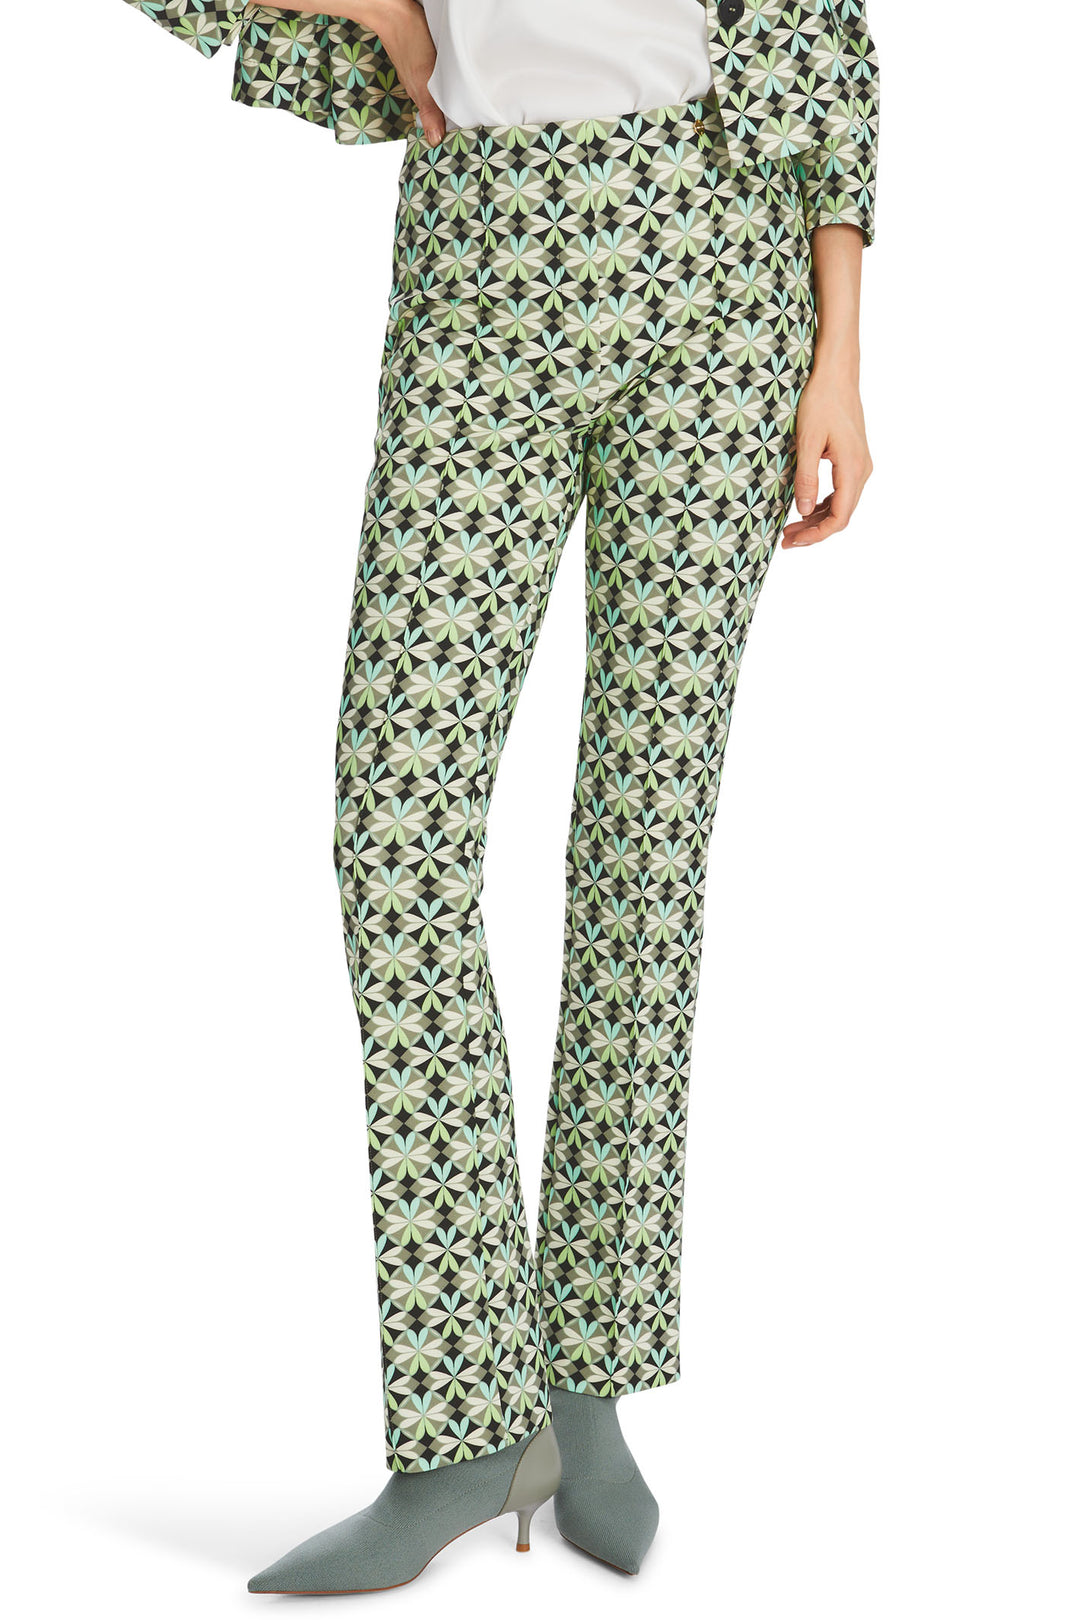 Marc Cain Collection XC 81.28 J08 Soft Malachite Green Print Pull-On Trousers - Olivia Grace Fashion